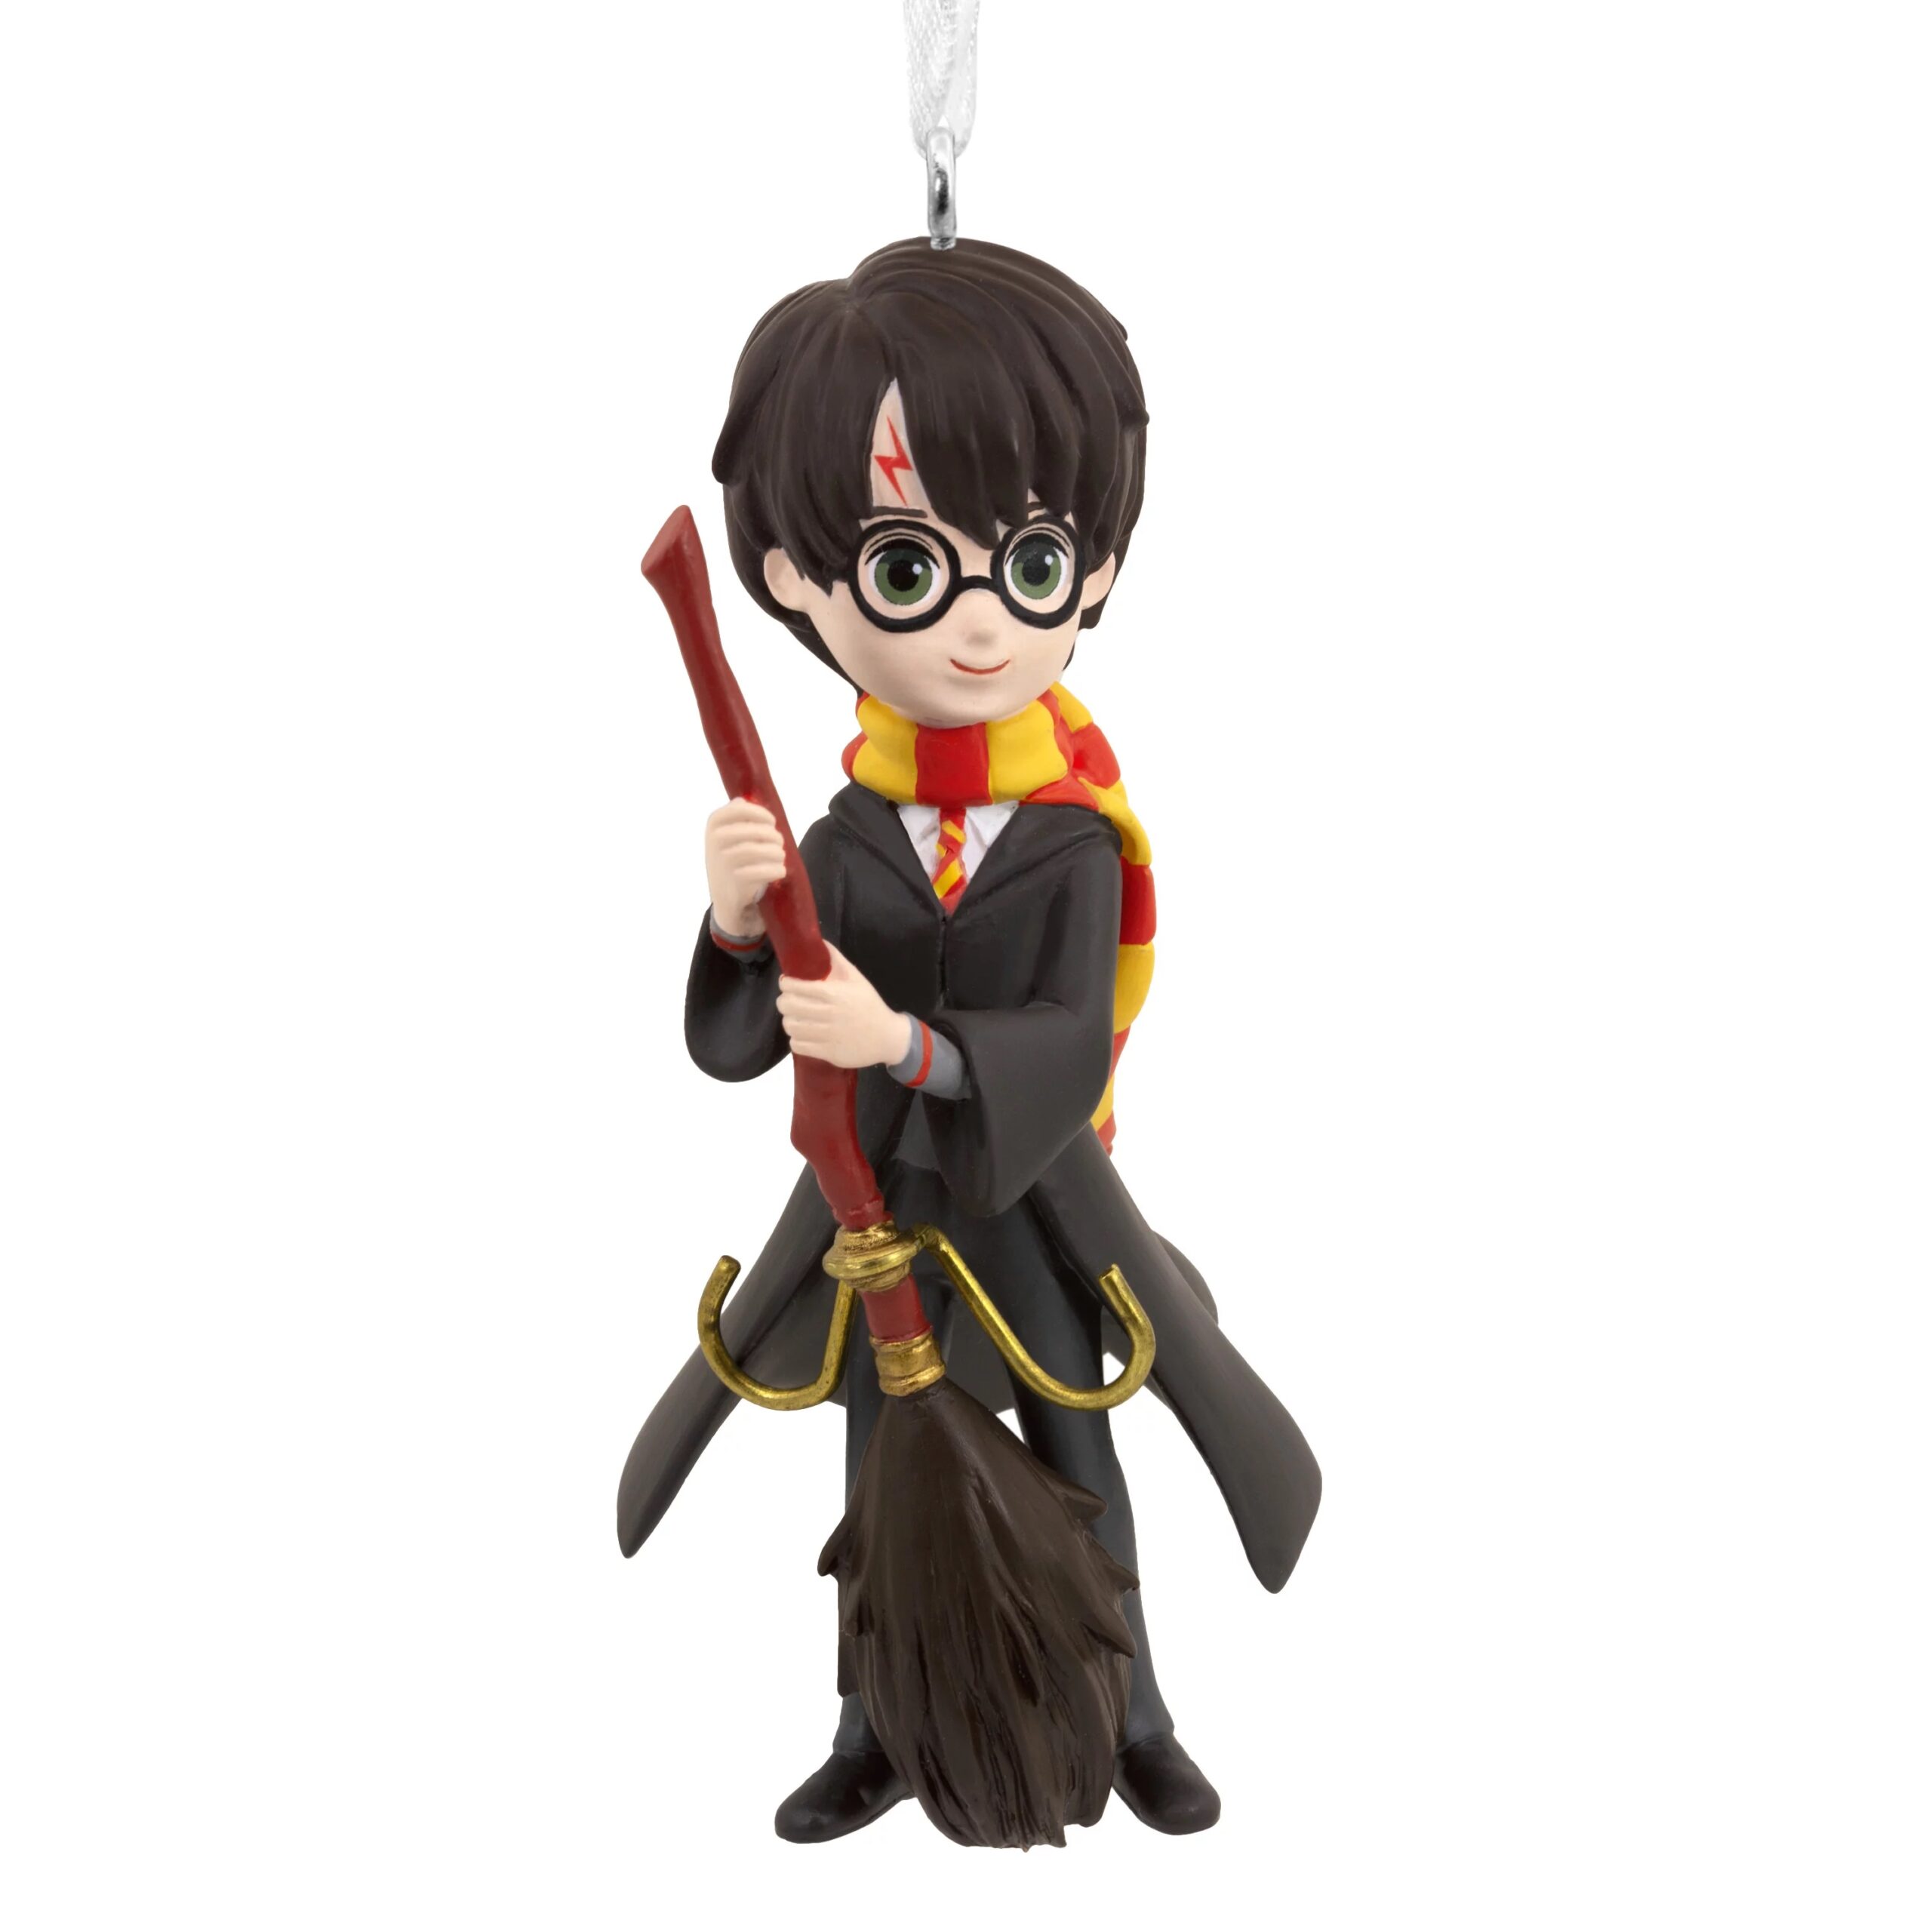 Hallmark Collectable Harry Potter Ornament - Harry Potter and Broom Design